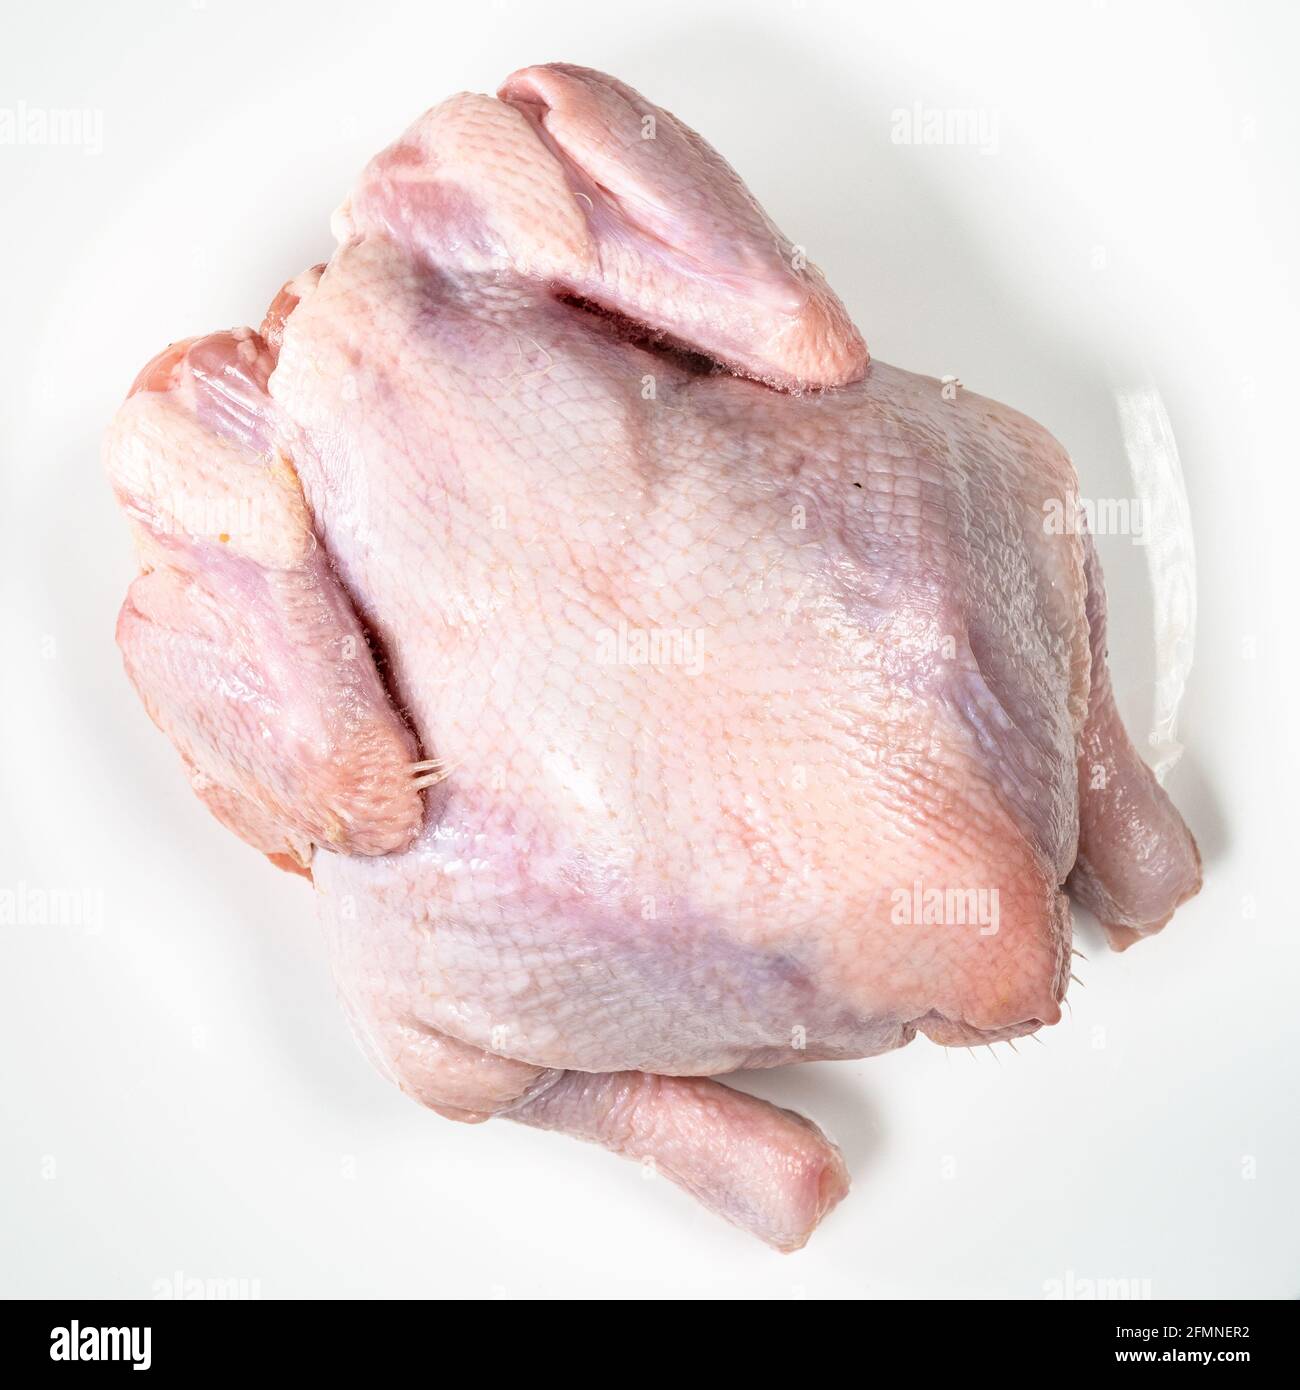 top view of whole air chilled uncooked chicken on white plate Stock Photo